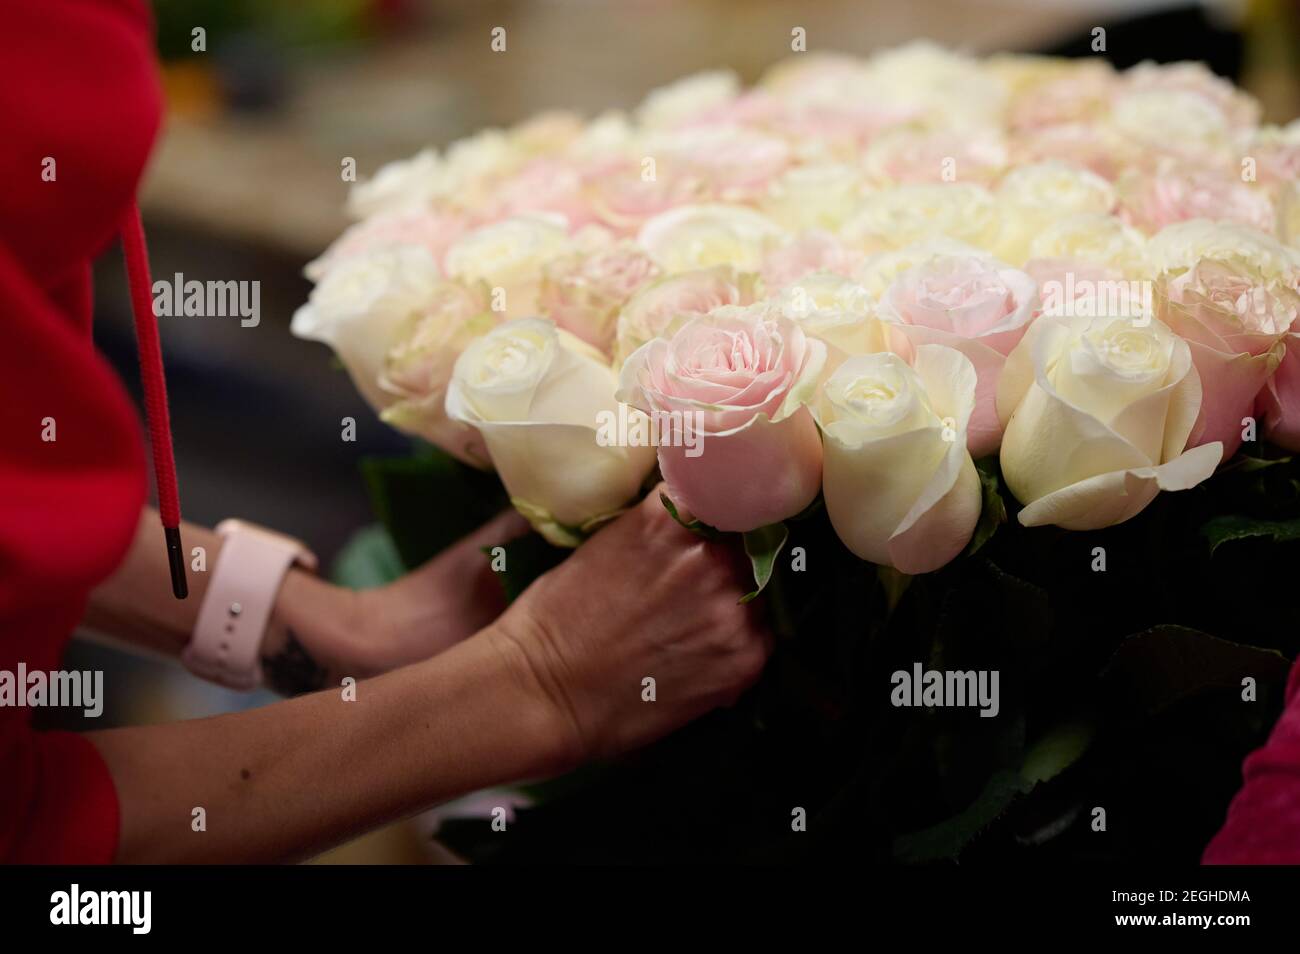 Florist's hands holding bouquet of white and pink roses Stock Photo